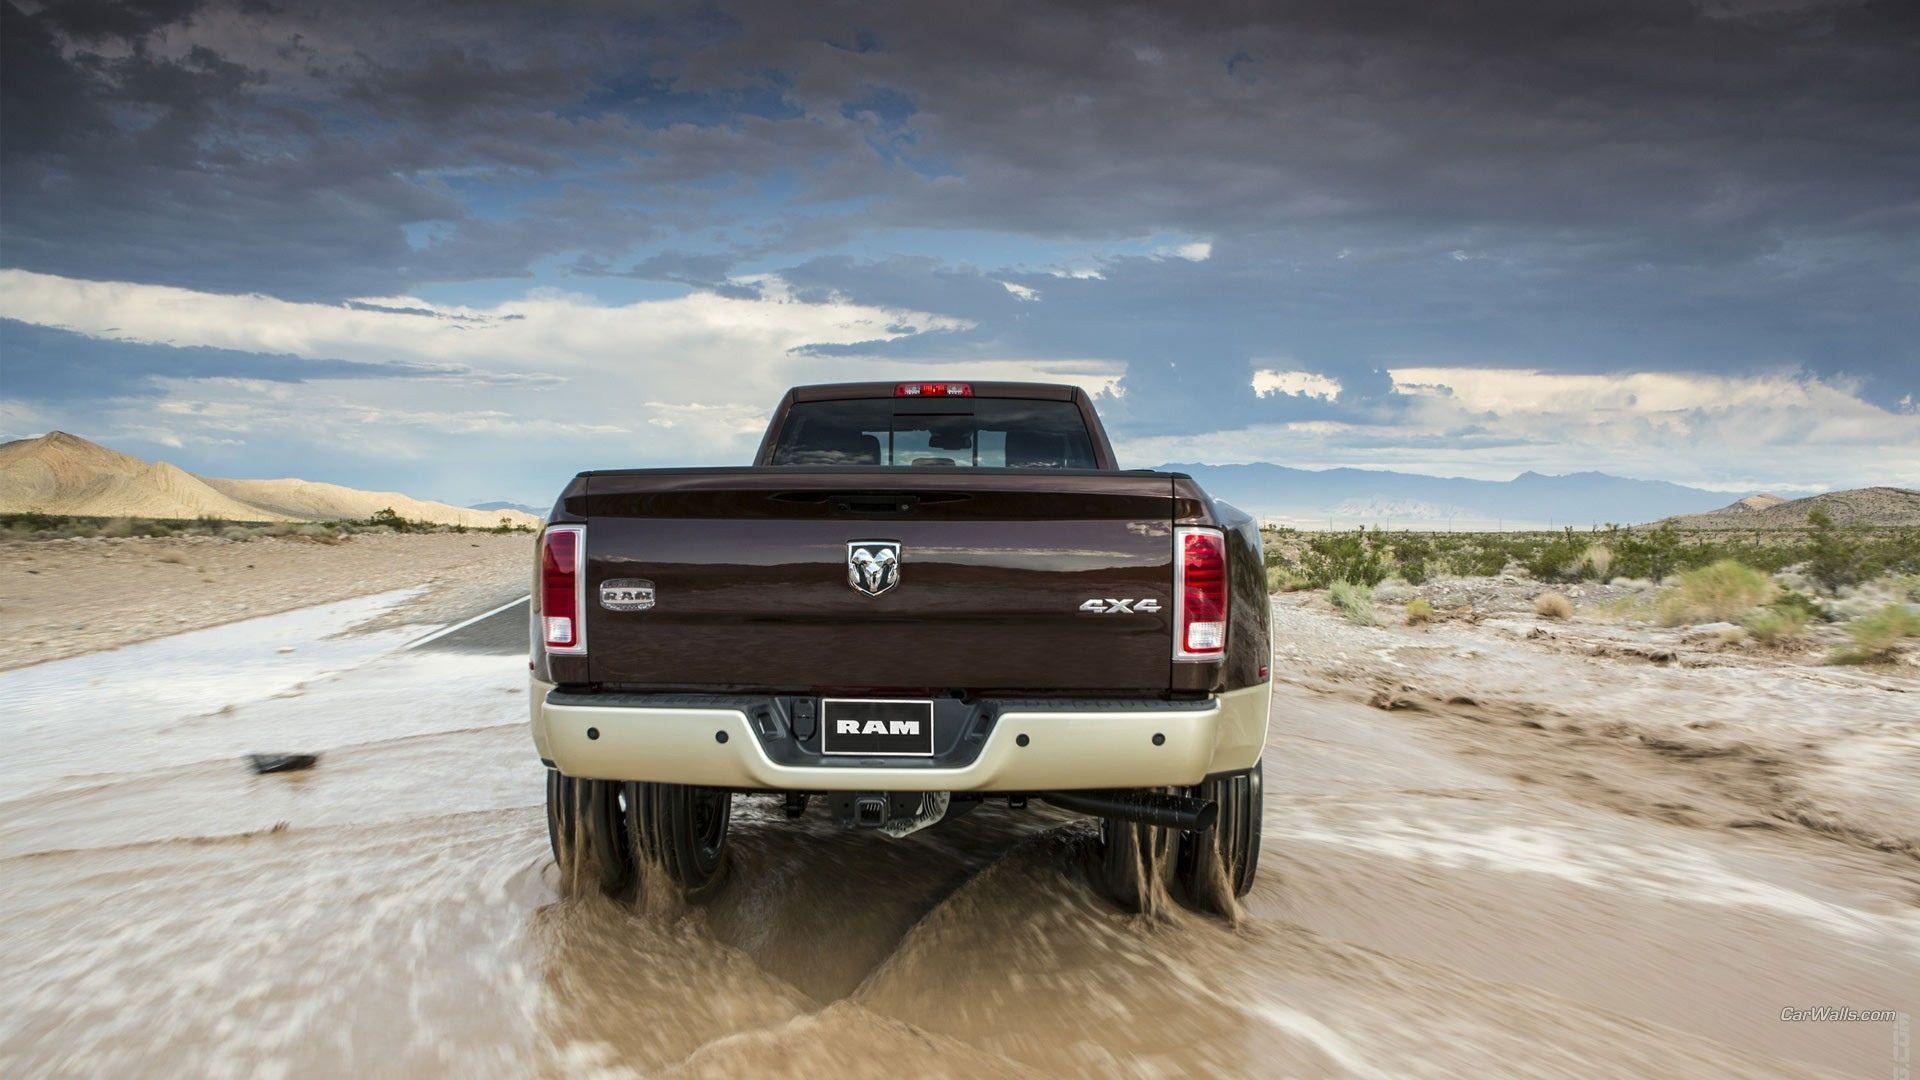 Dodge Ram 3500 HD Wallpaper and Background Image